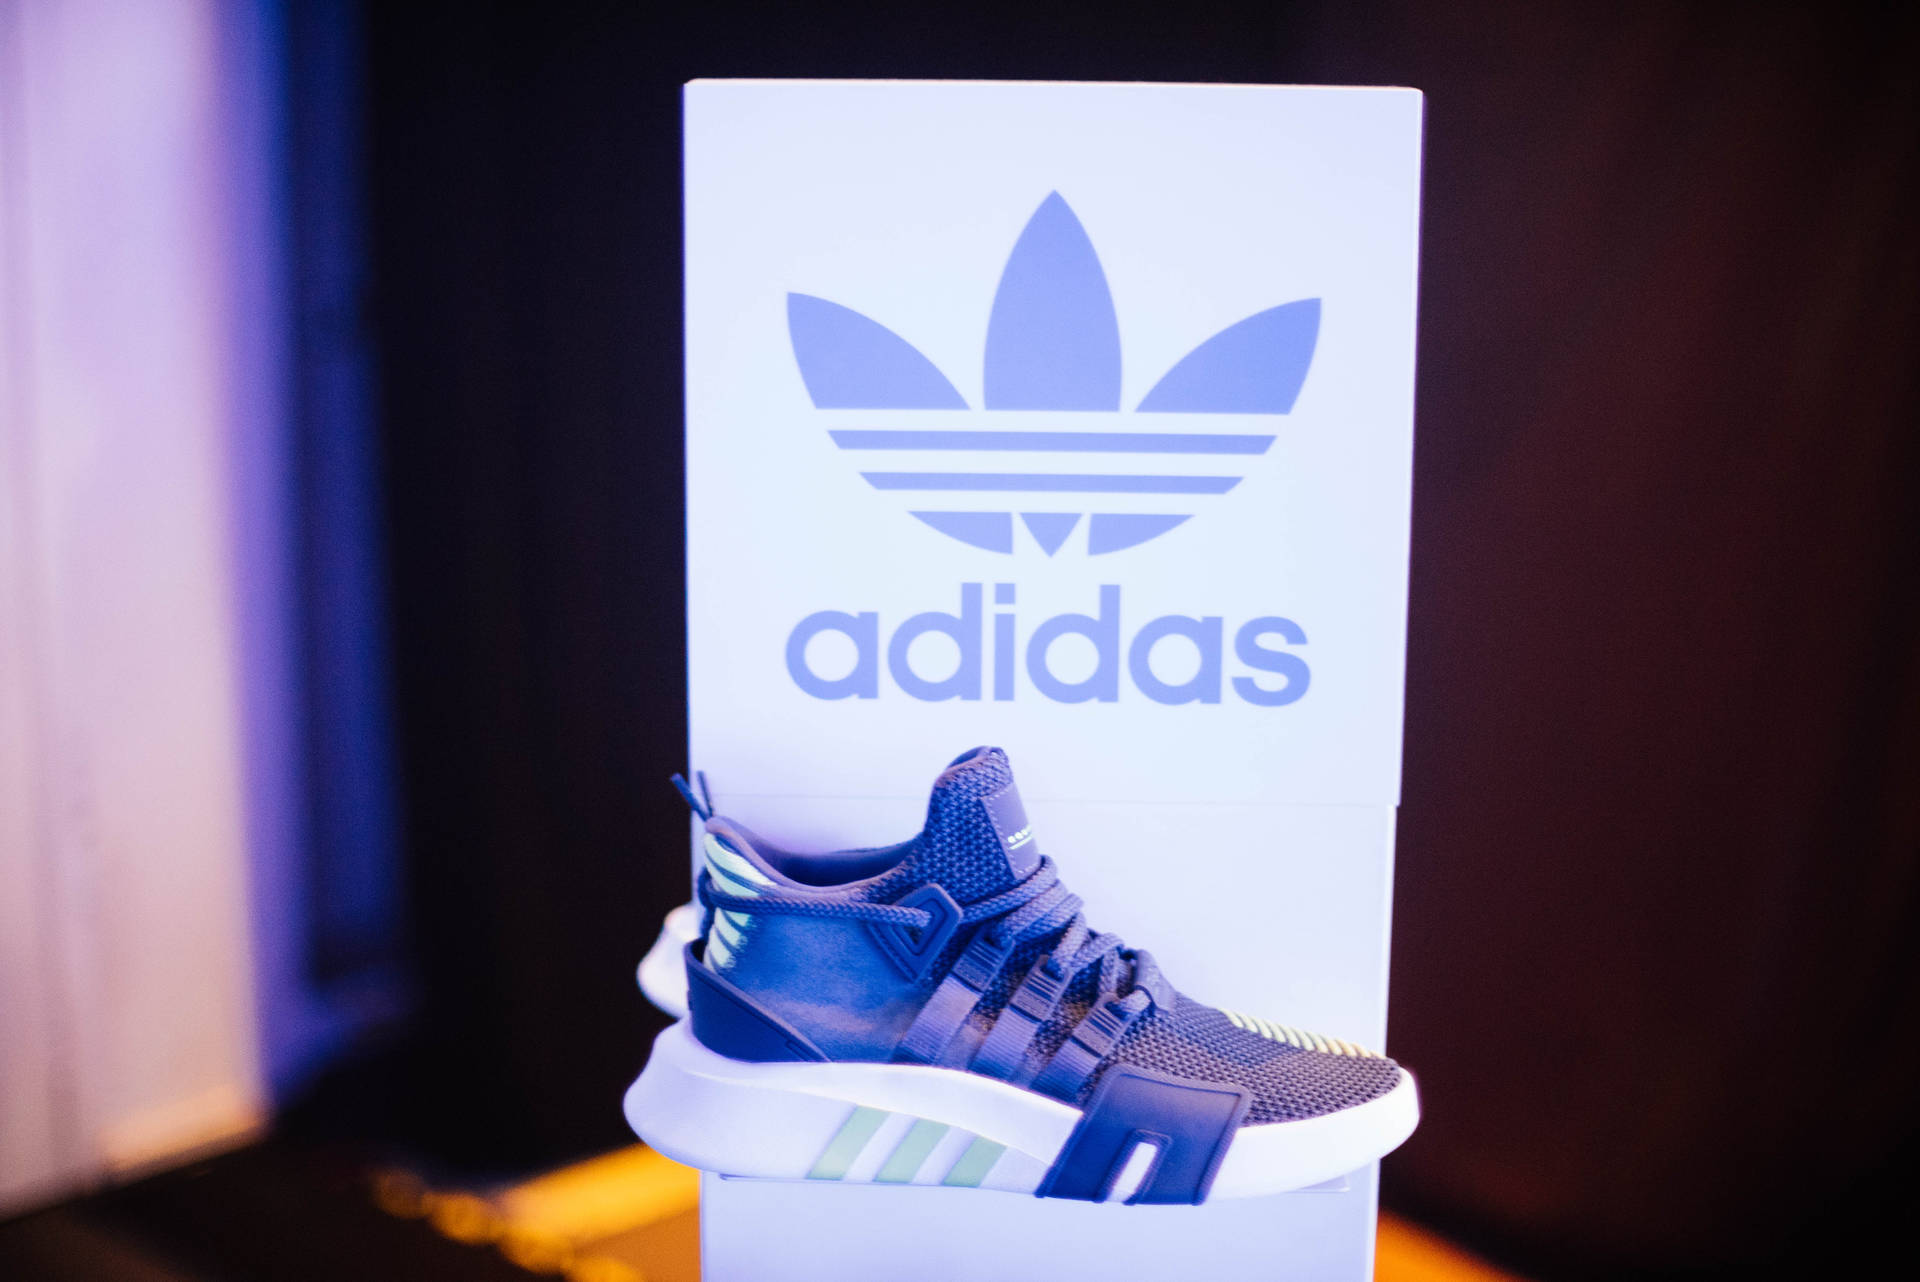 6016X4016 Adidas Wallpaper and Background